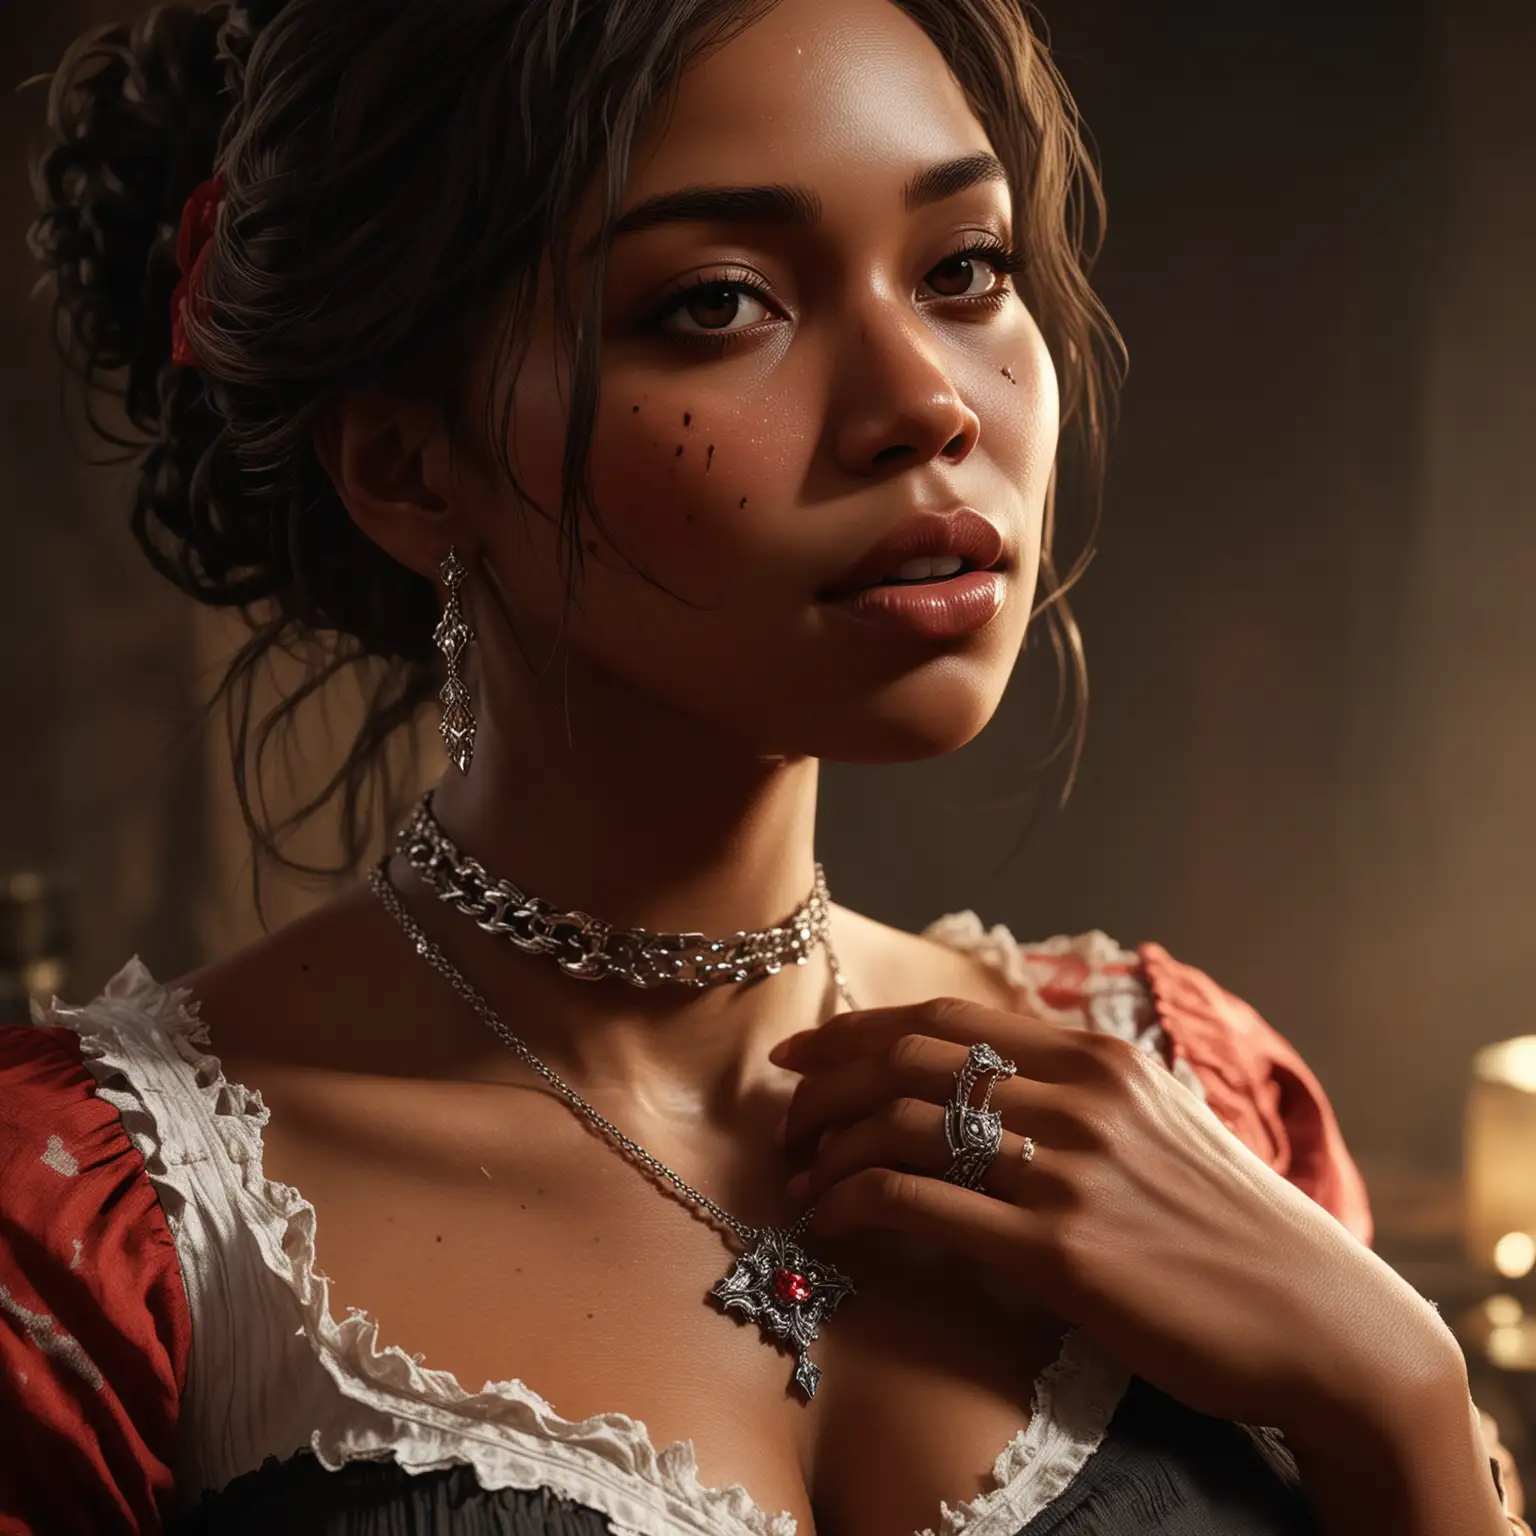 Legendary Red Dead Redemption 2 Art with Diamond Jewelry and Beautiful Black Women